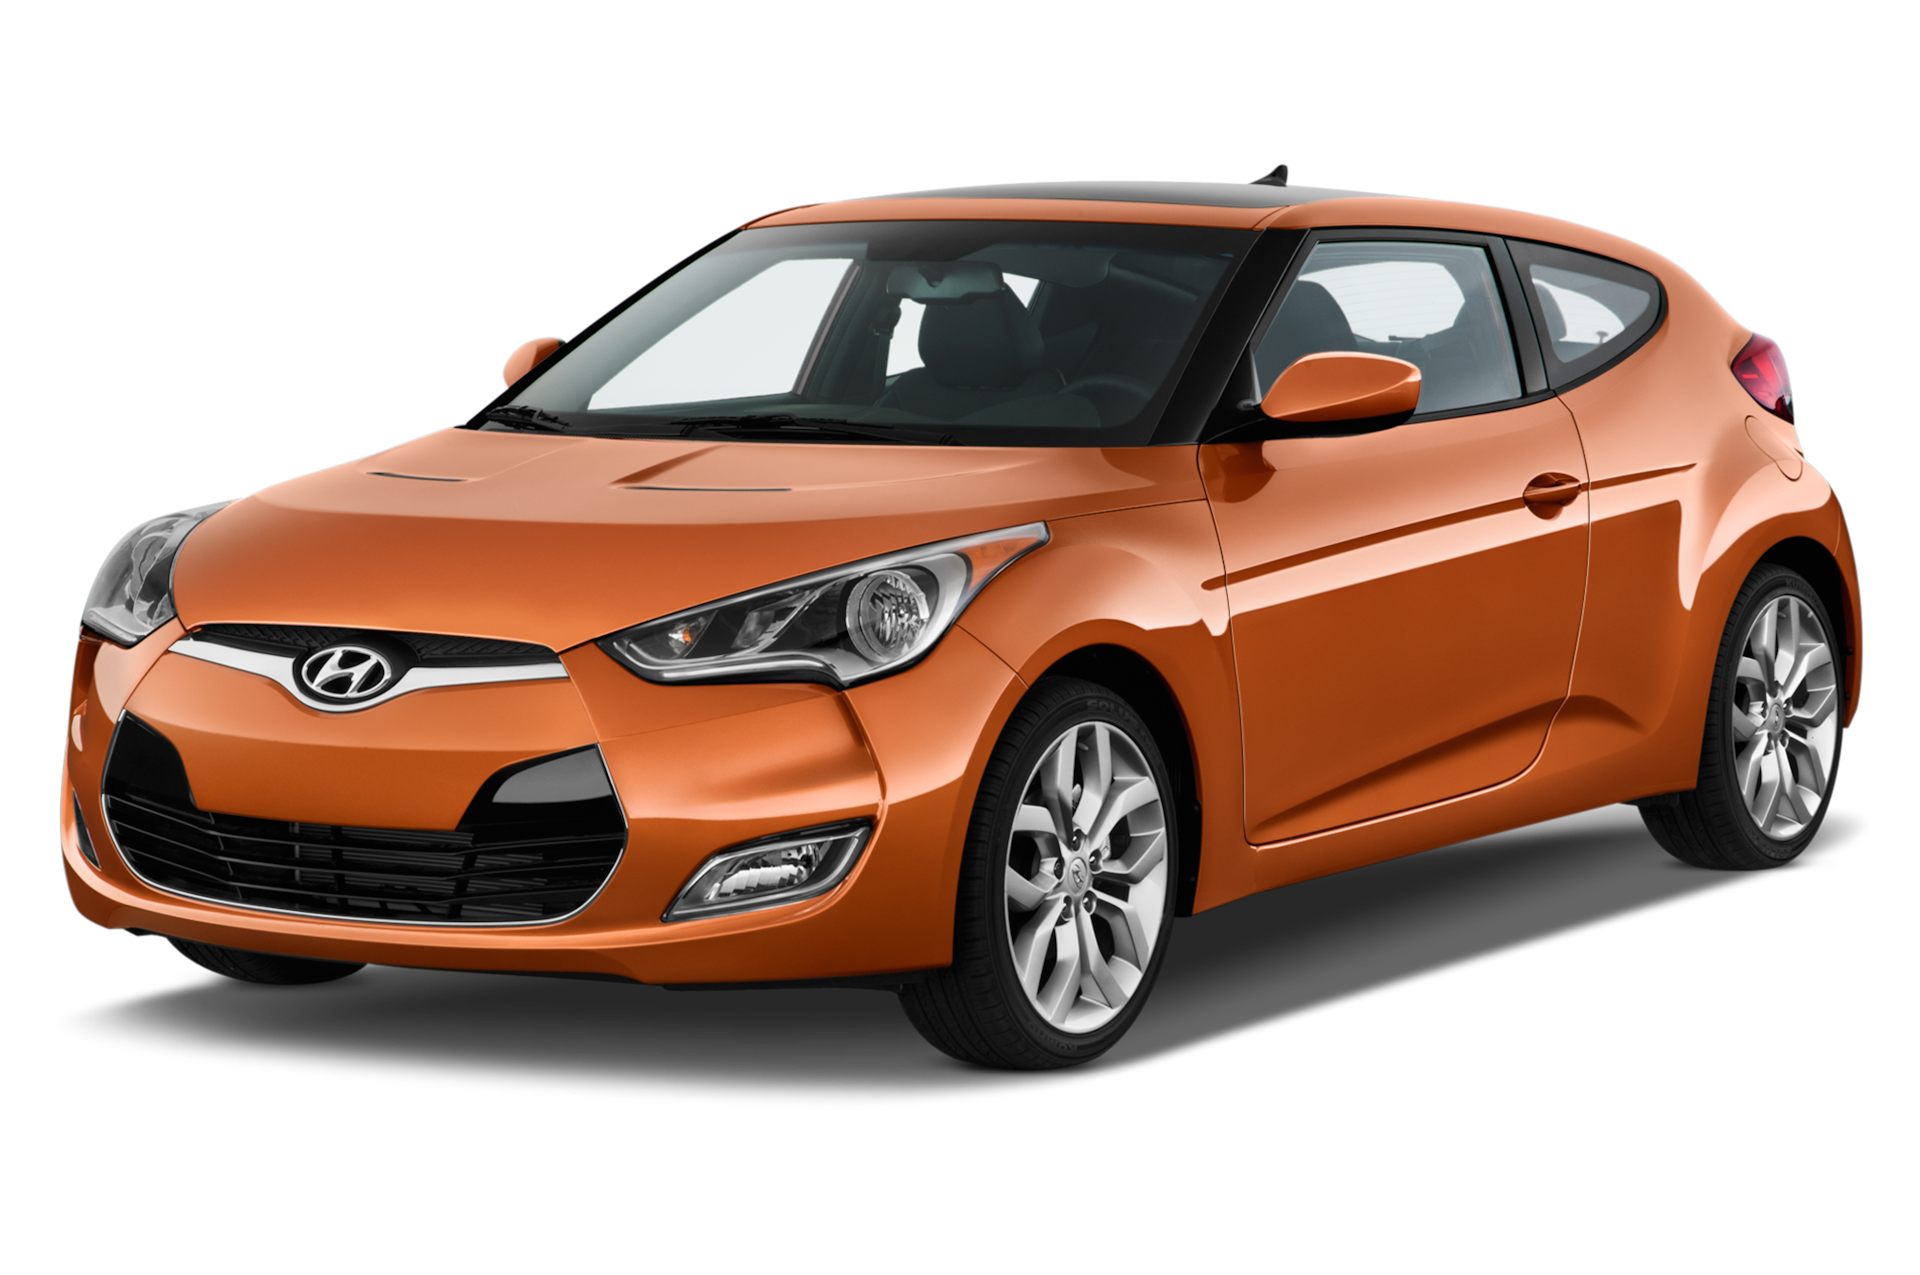 2015 Hyundai Veloster Prices, Reviews, and Photos - MotorTrend